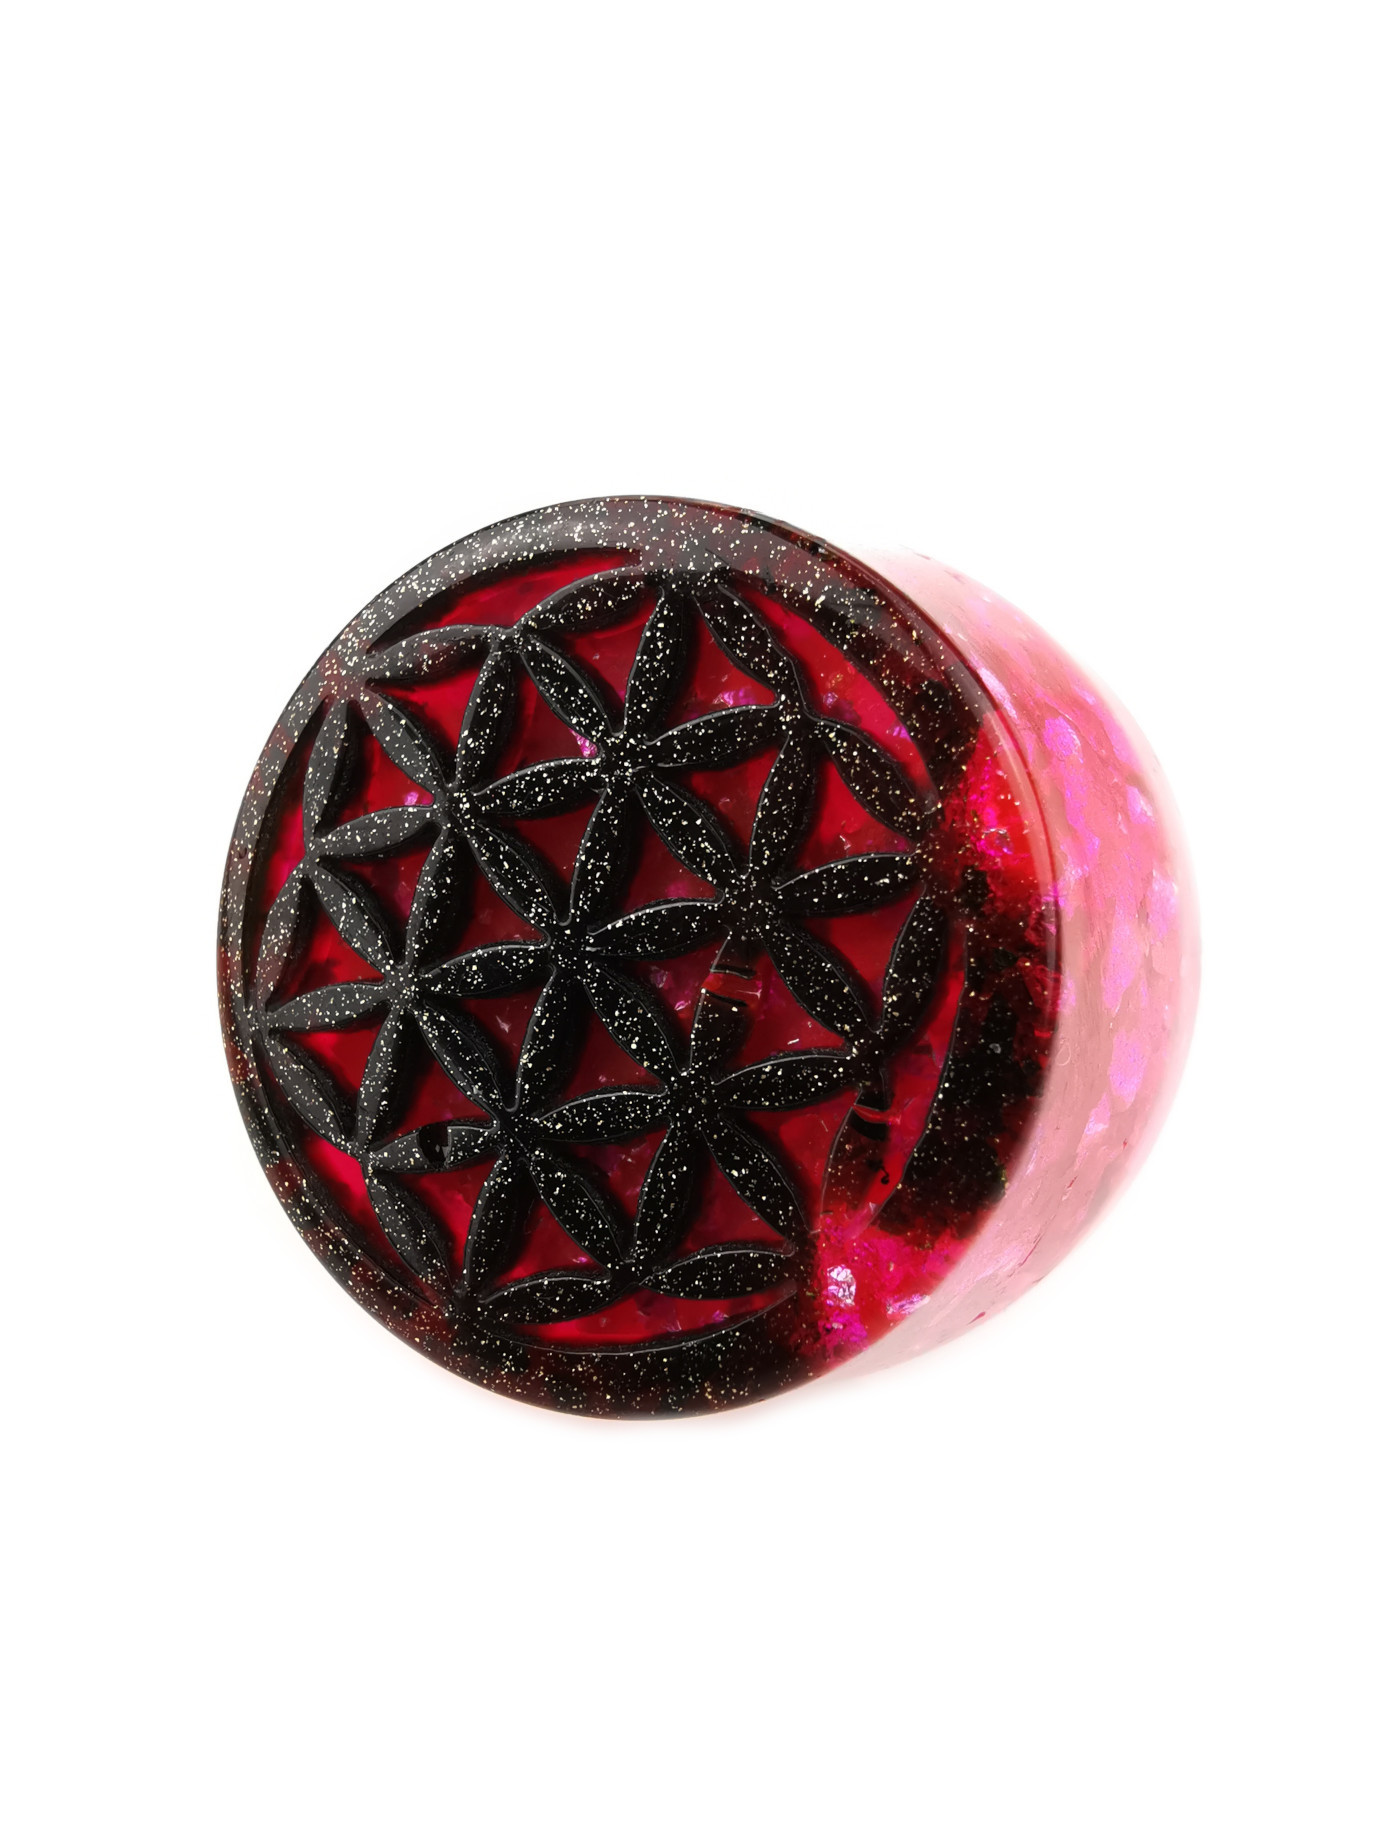 Pink Flower of Life Orgone Puck in Black and Pink by OgoneVibes